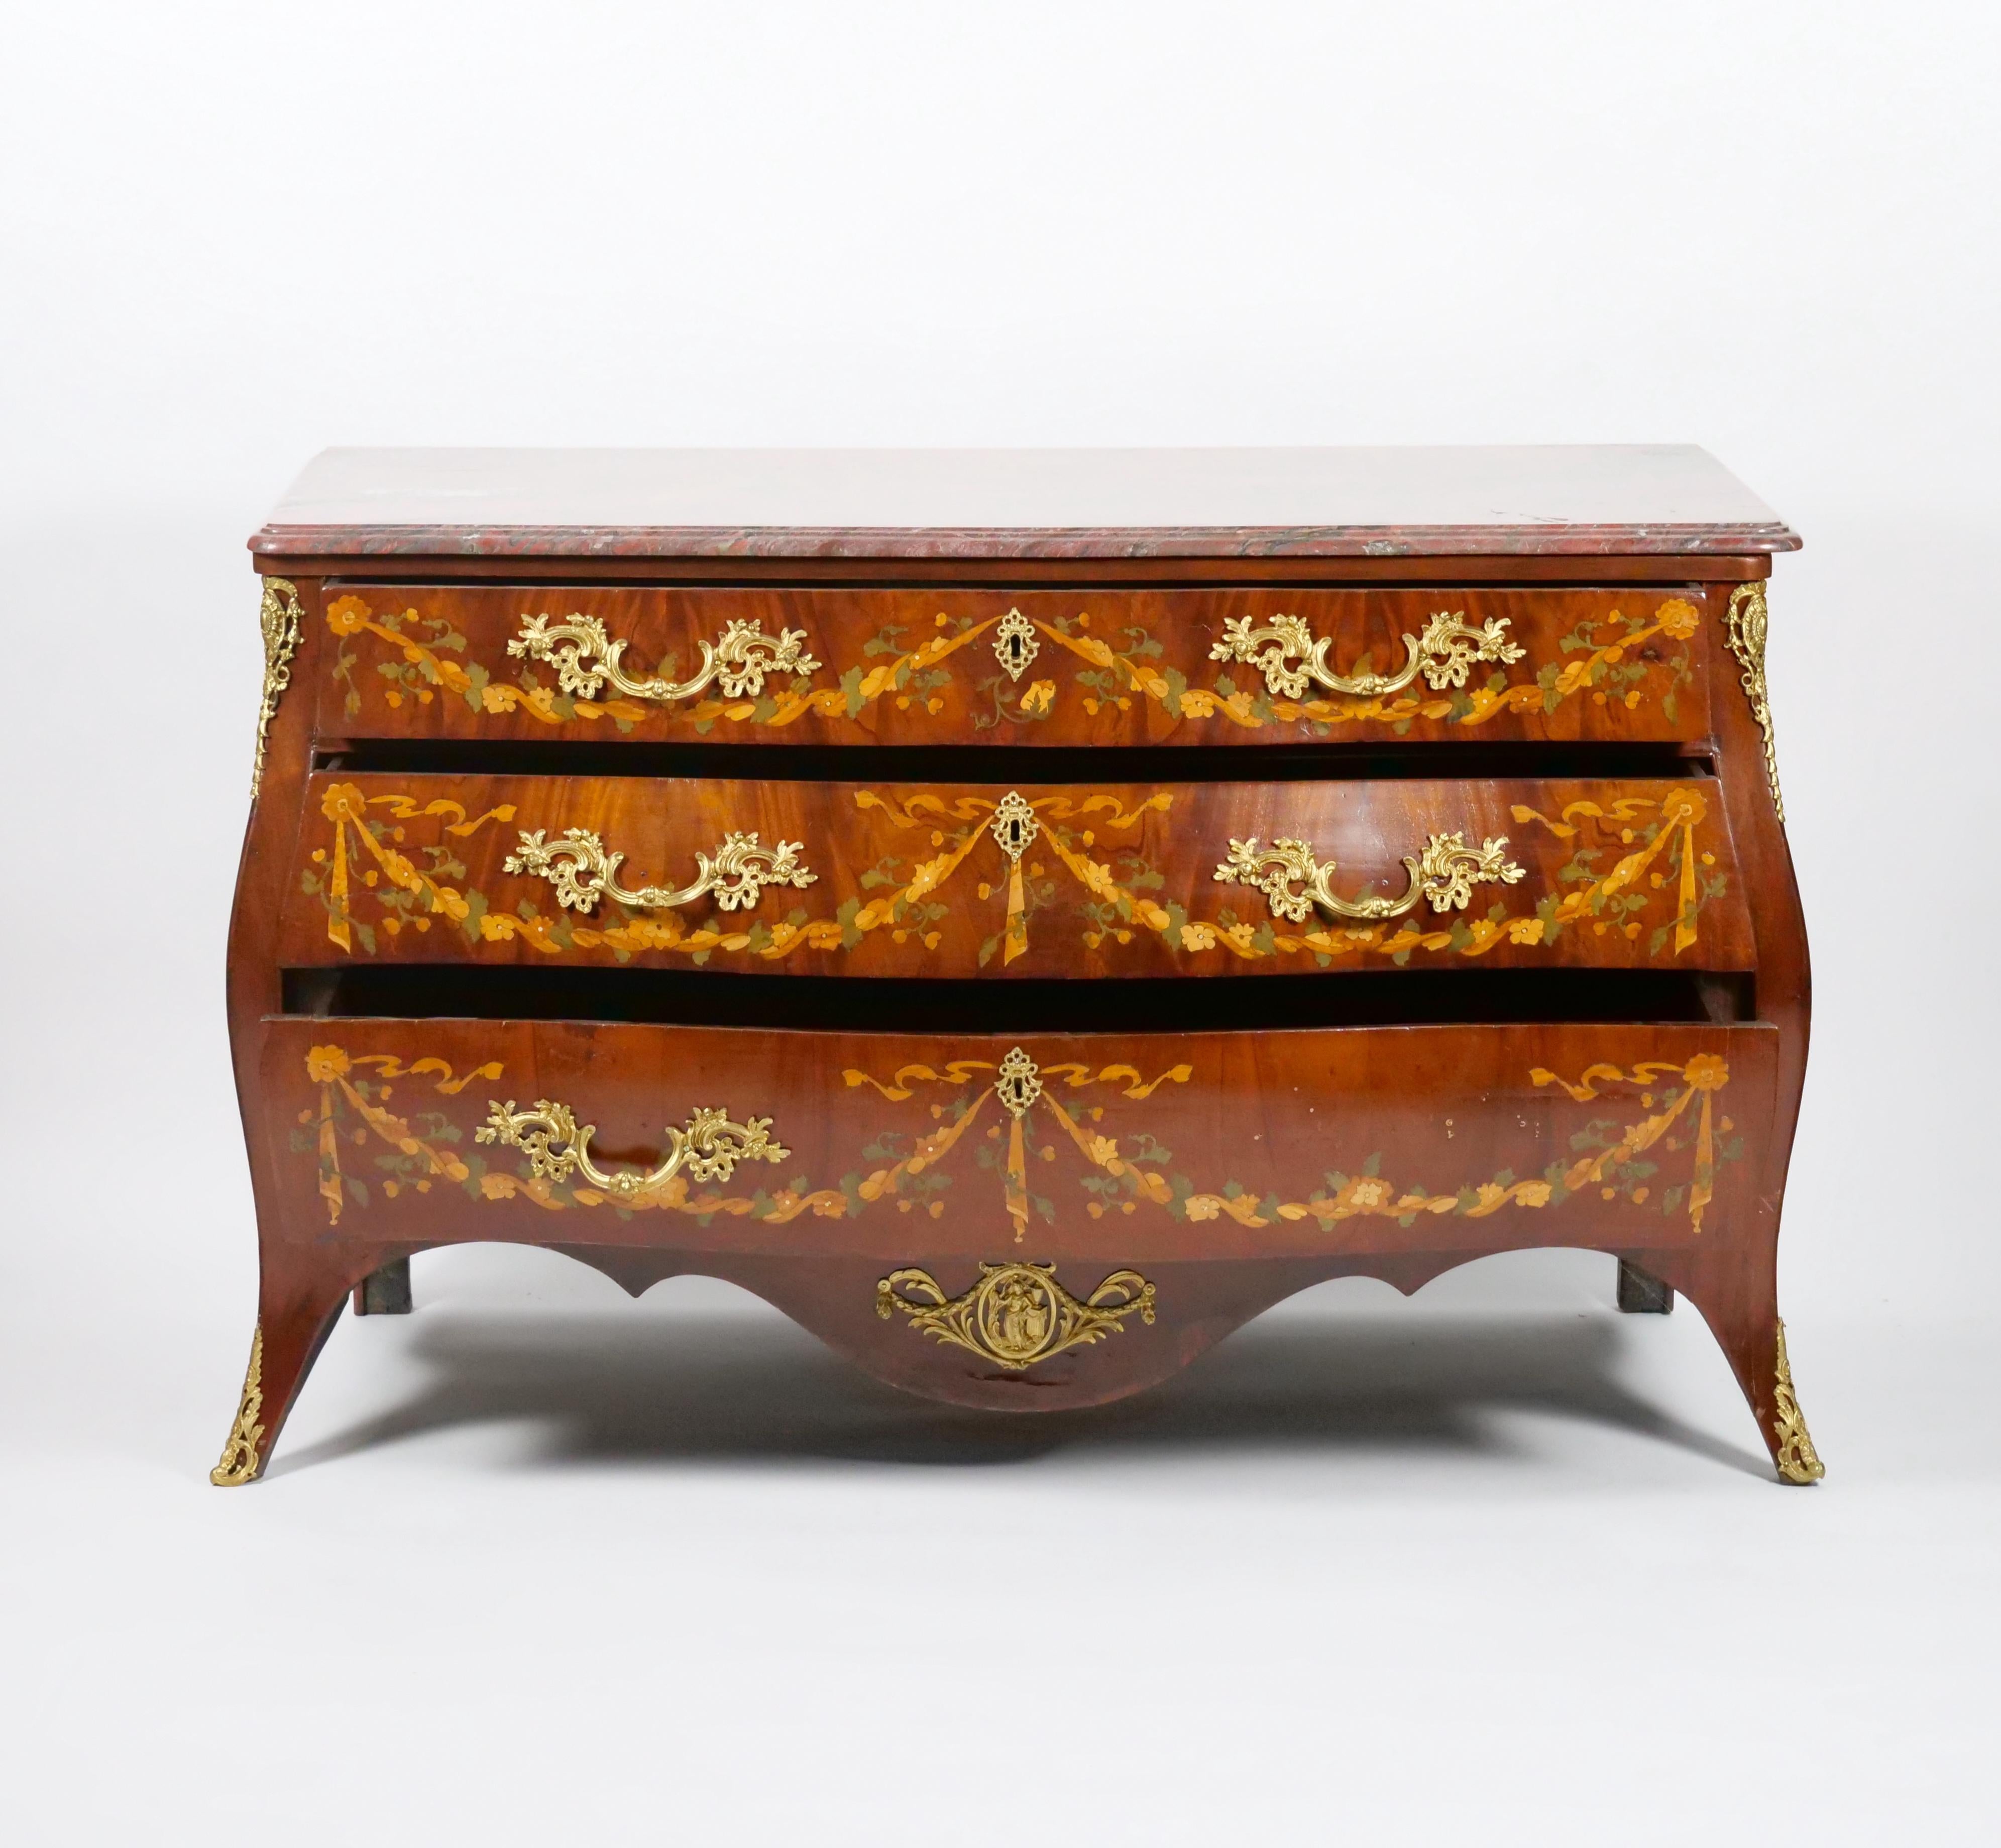 Louis XV Antique Marble Top Floral Marquetry Inlaid Mahogany Commode / Credenza For Sale